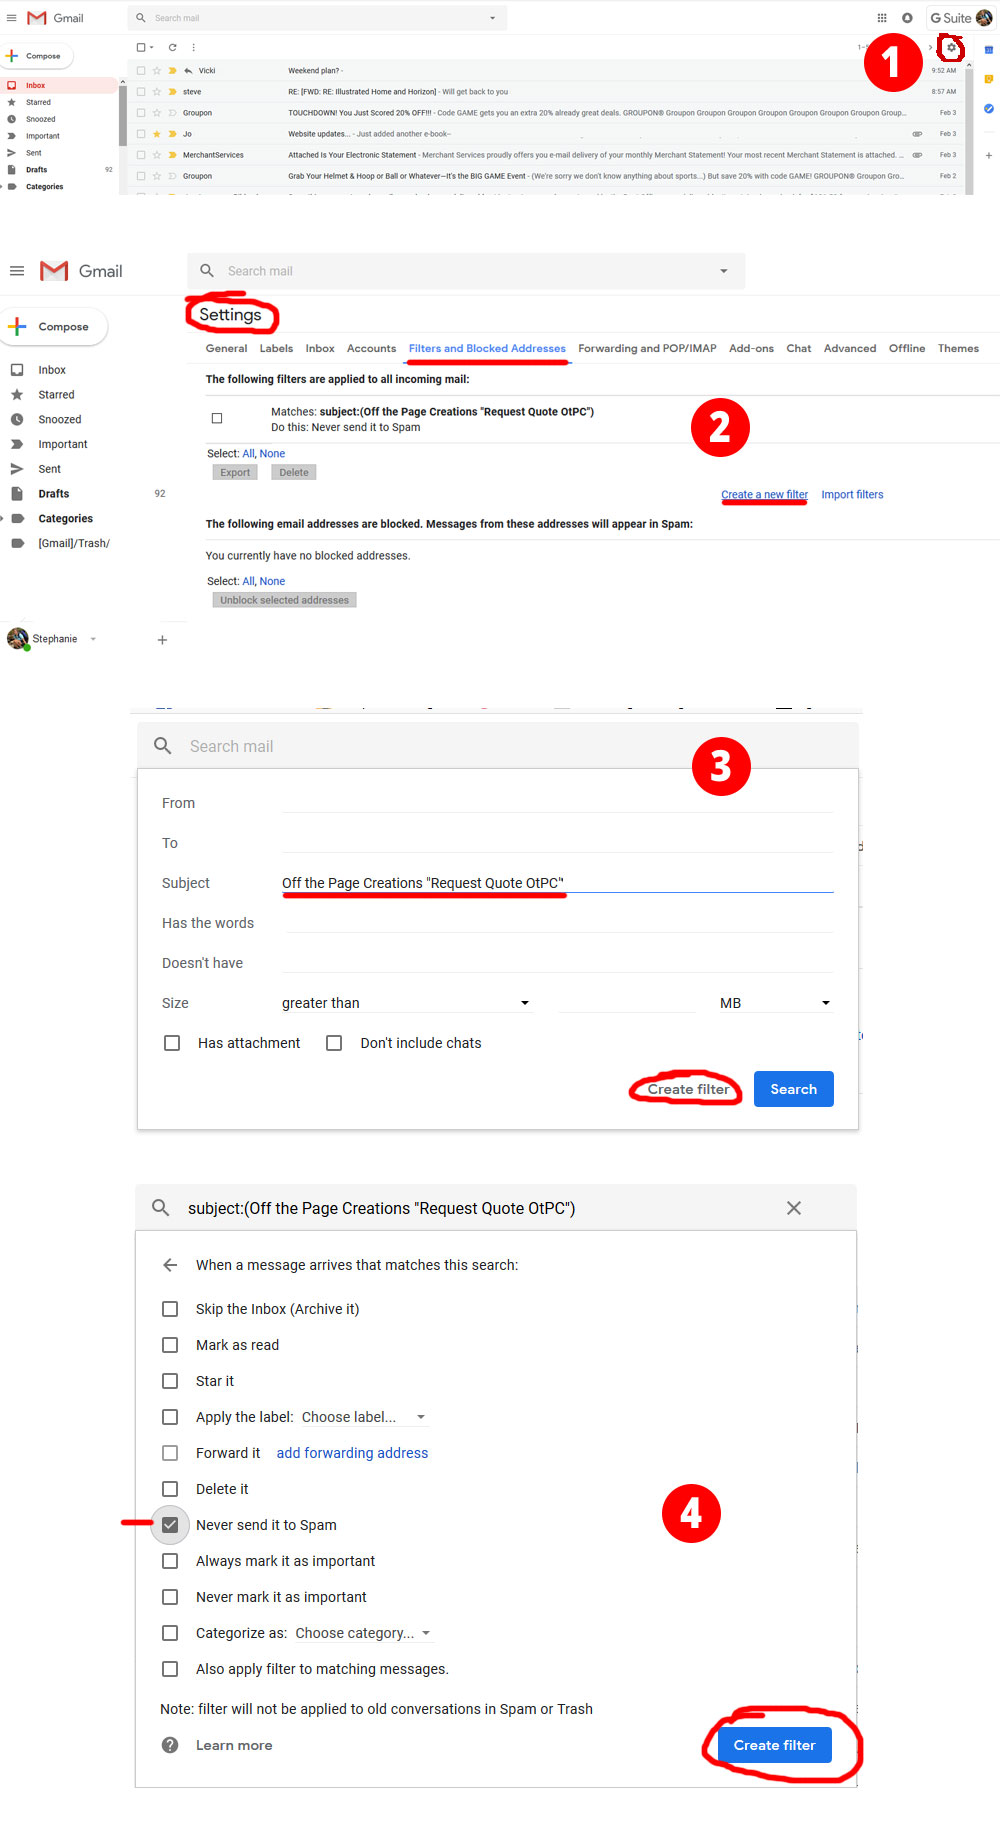 gmail add filter instructions